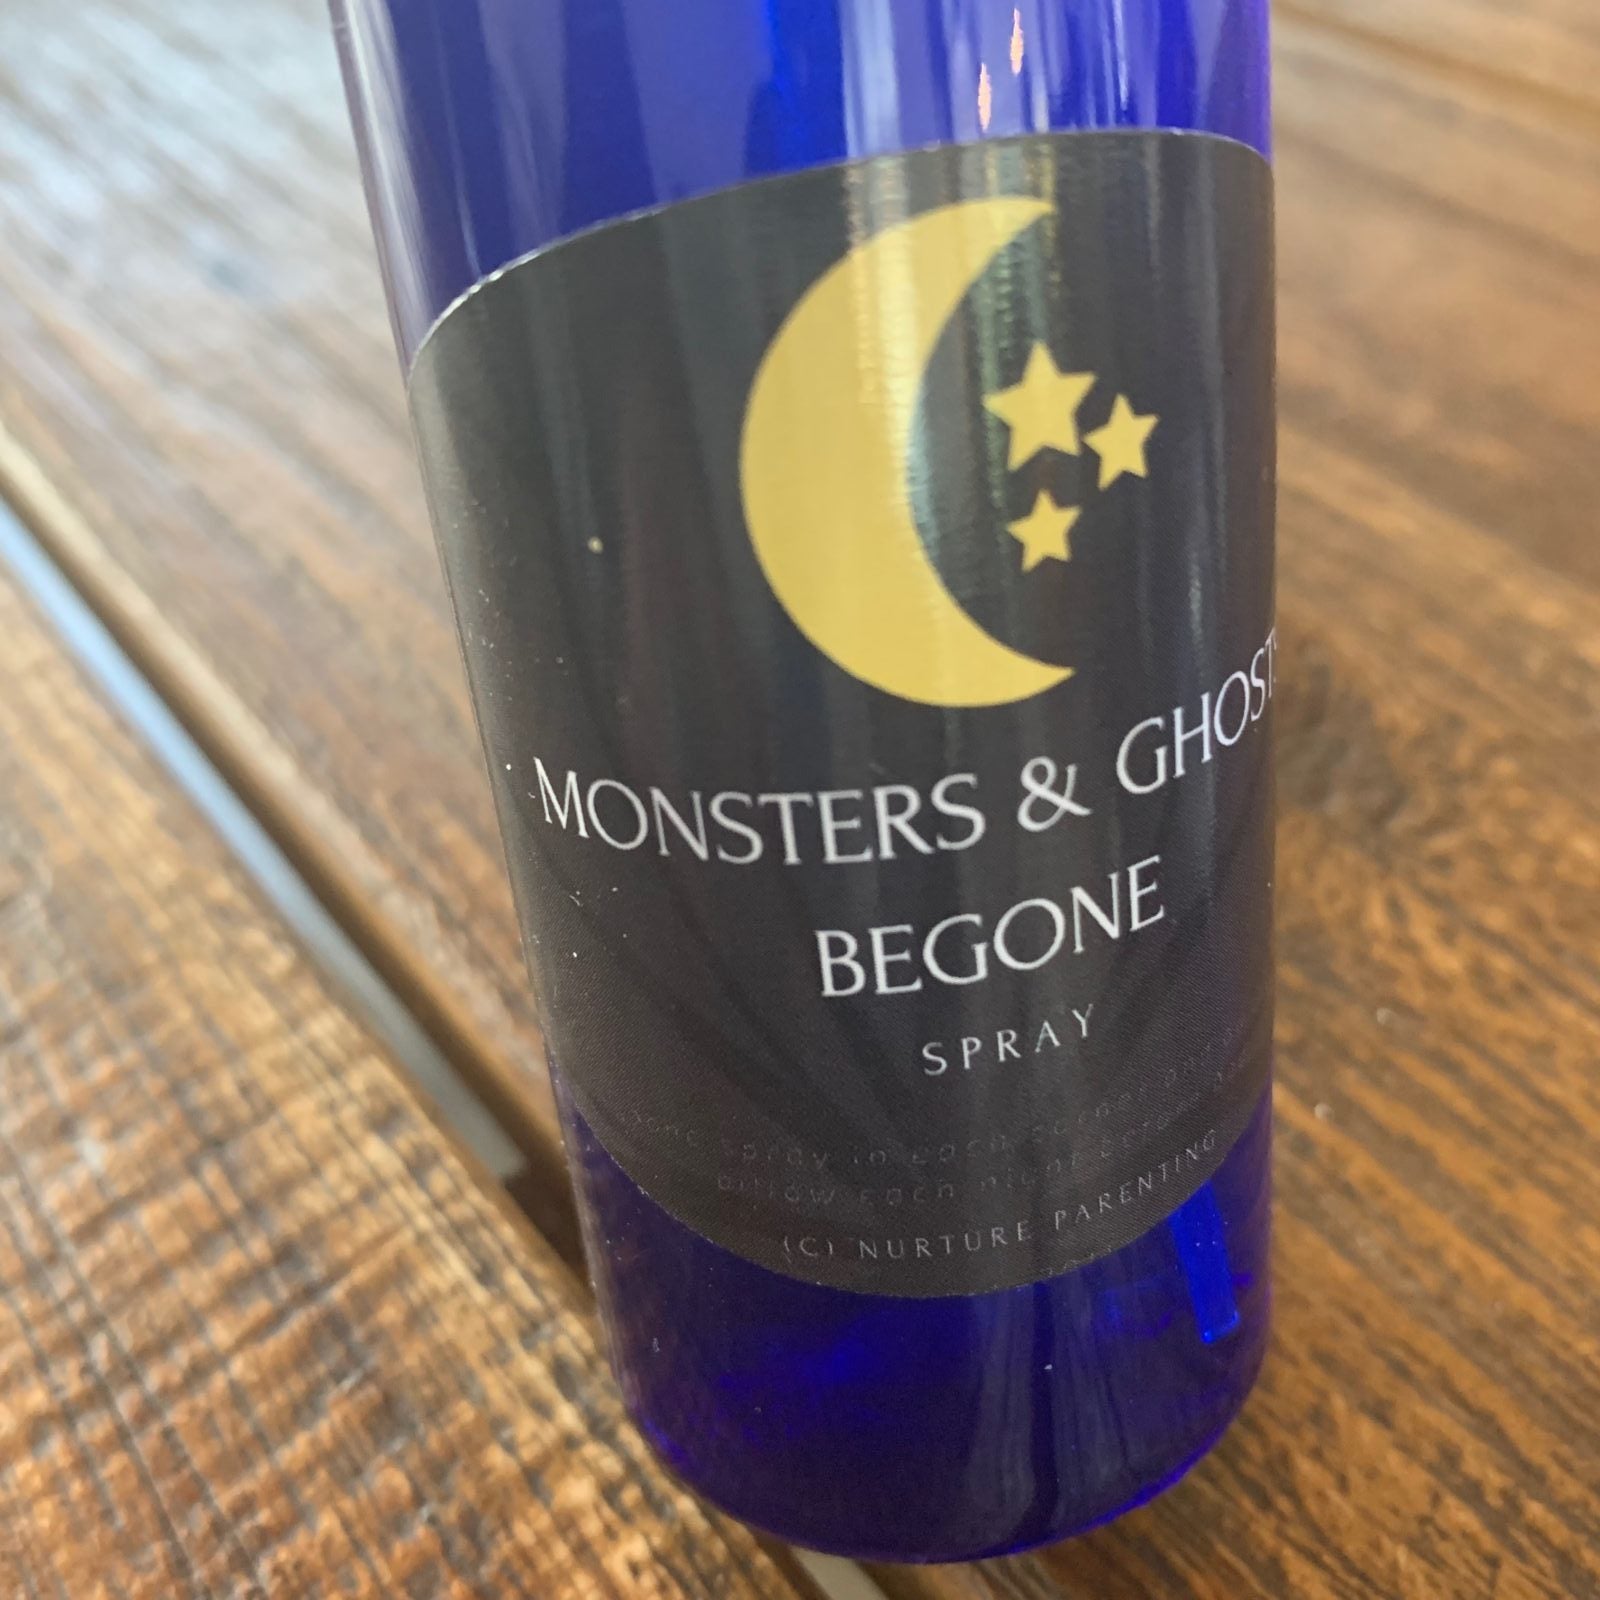 Magic Sleep Dust & Monsters and Ghosts Be Gone Spray